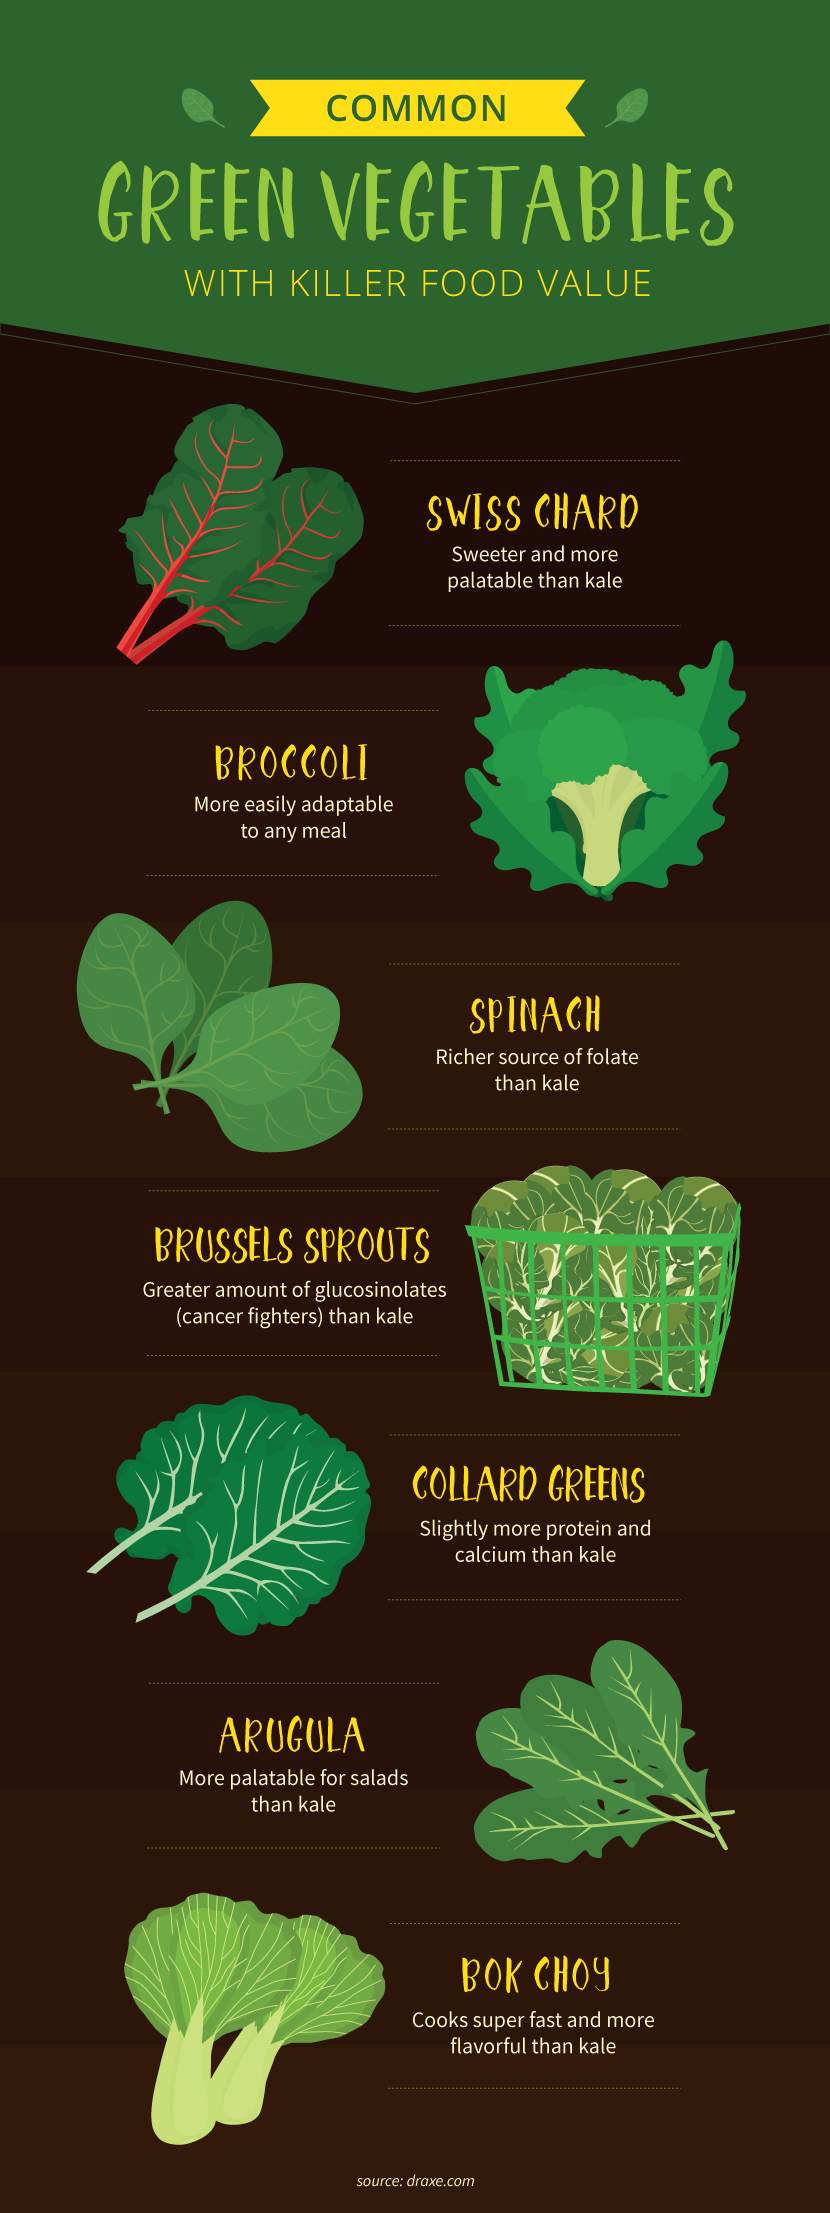 Green Vegetables With Amazing Nutritional Value - Try These Superfood Greens